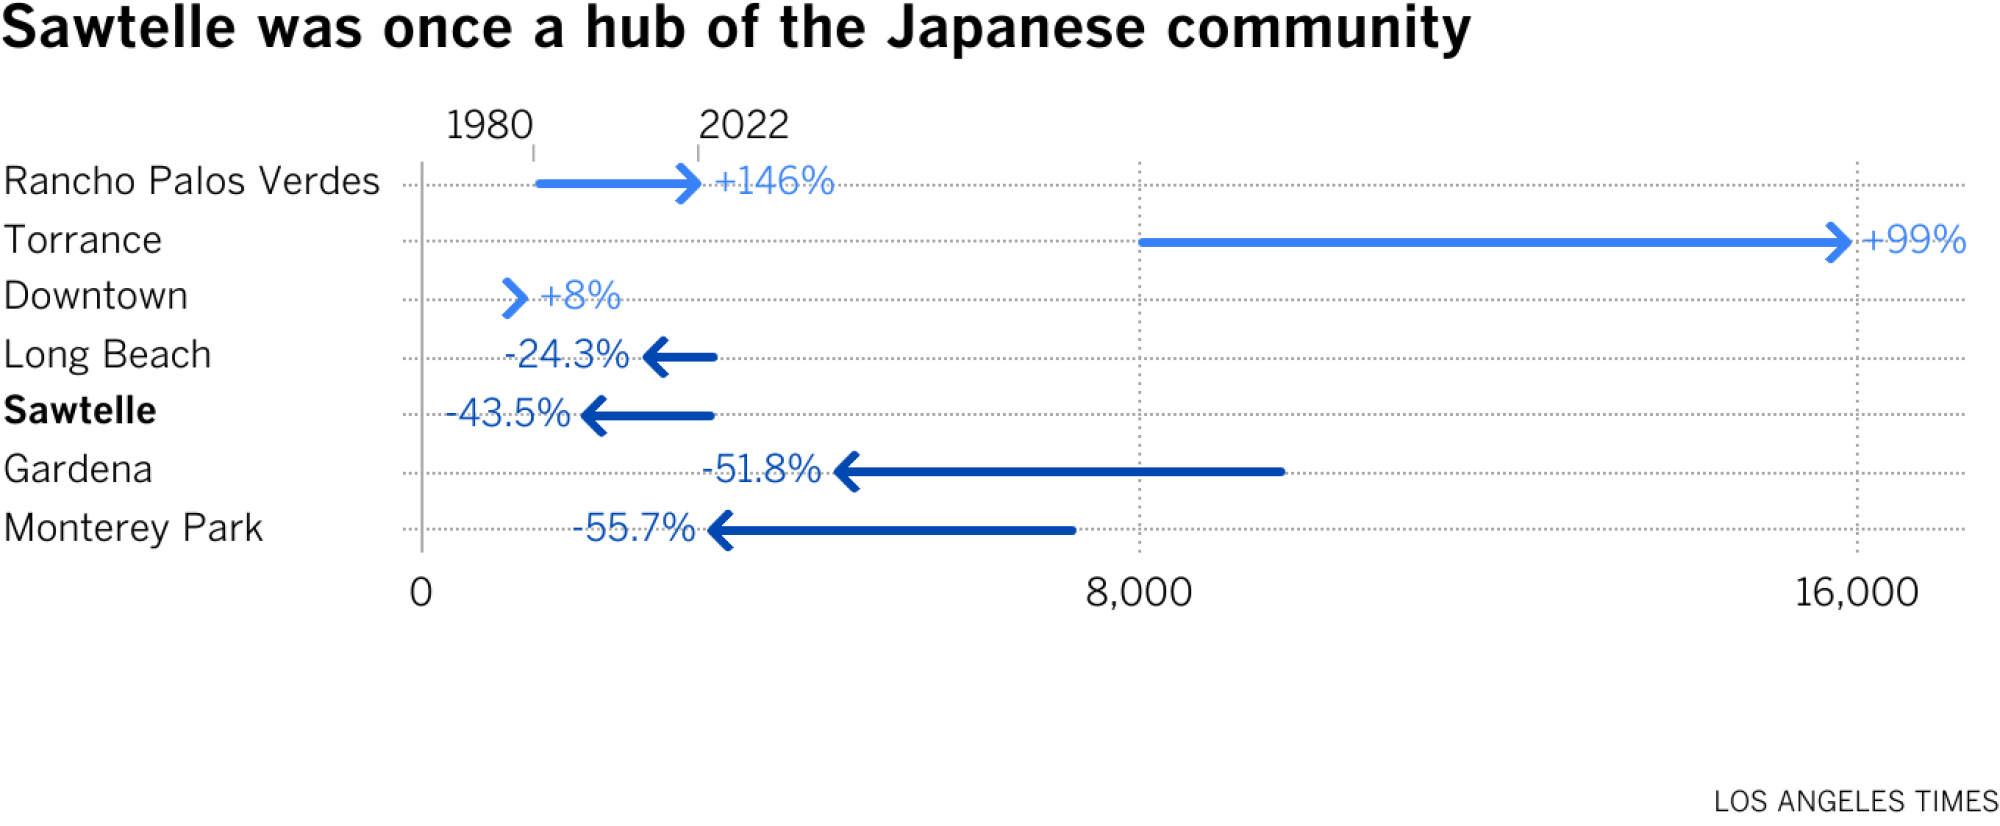 Arrow chart showing the change in Japanese population from 1980 to 2022. The biggest change in Japanese population was in Rancho Palos Verdes followed by Torrance and Downtown. 